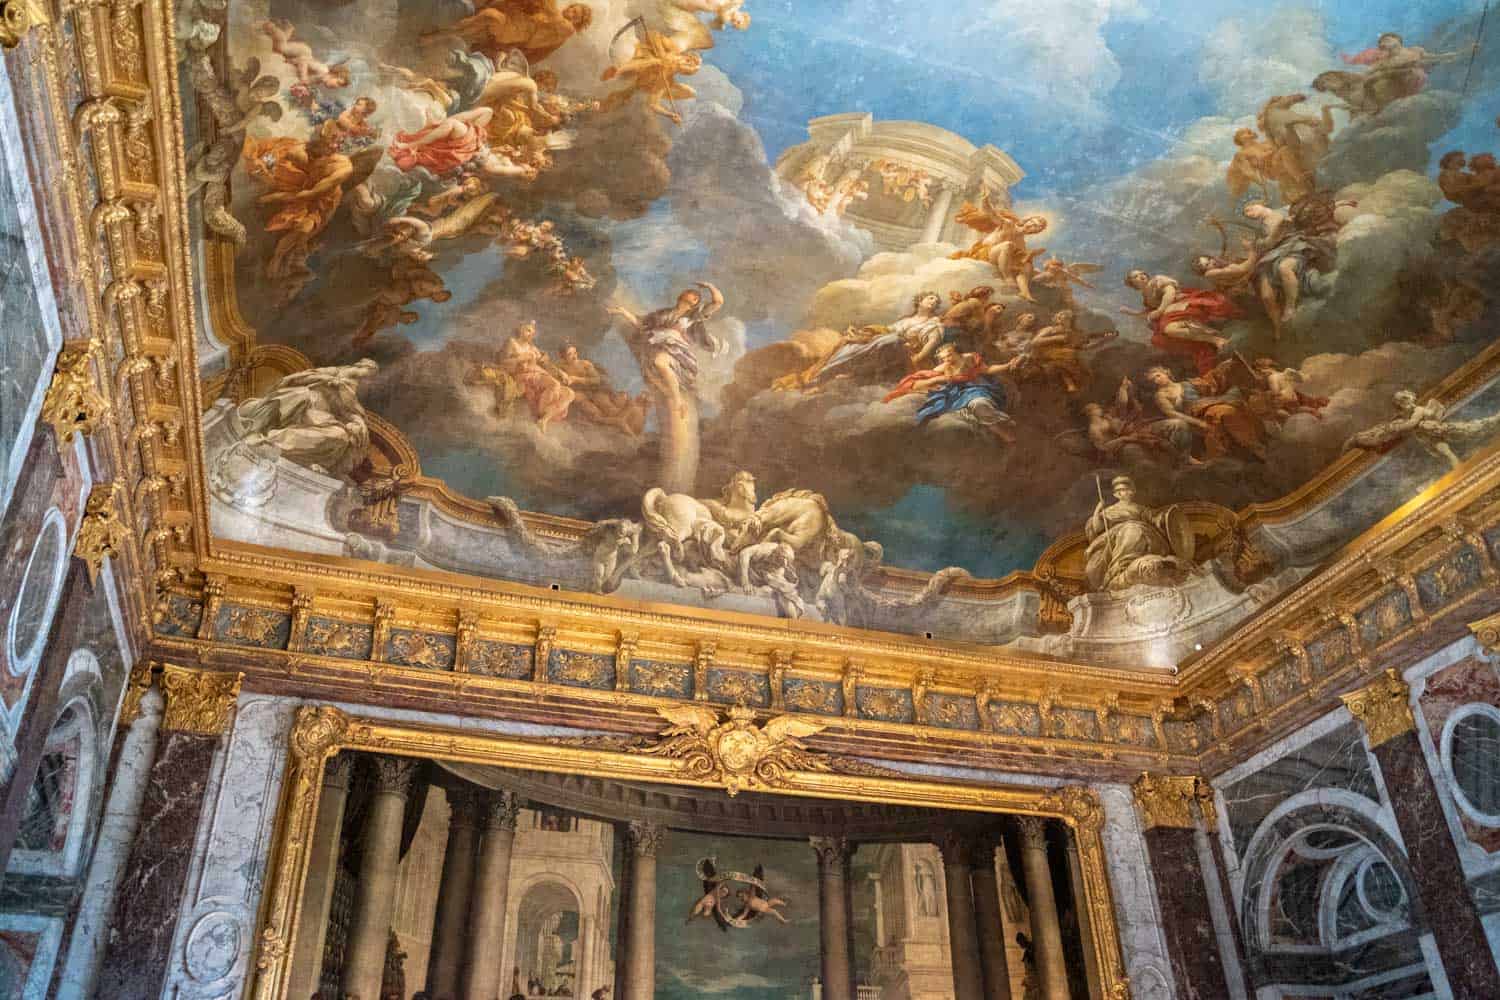 Painted ceiling inside the Palace of Versailles